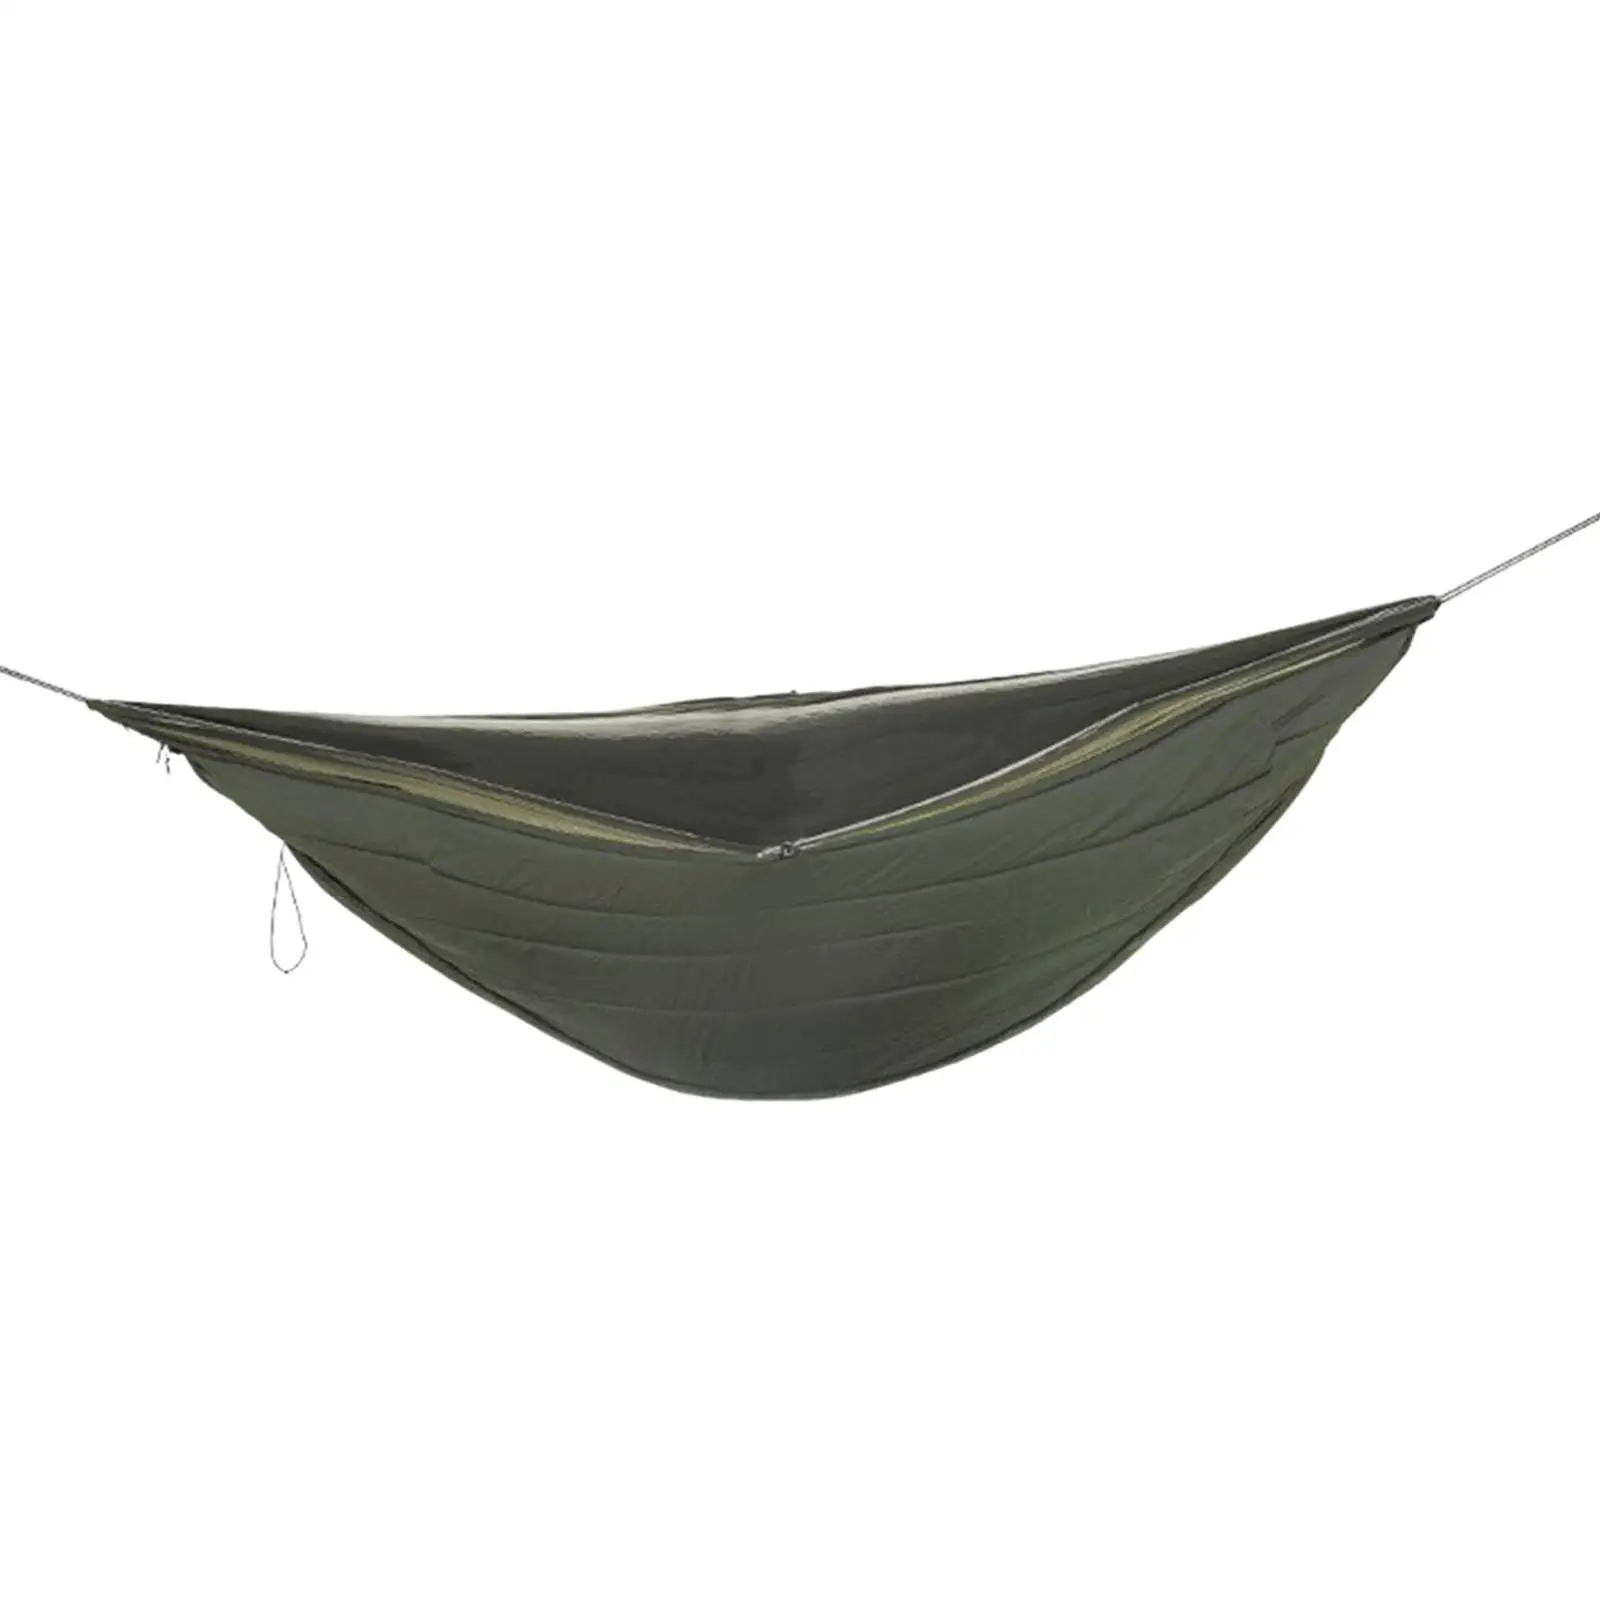 Hammock Underquilt Lightweight Warm Insulated Full Length for Outdoor Travel